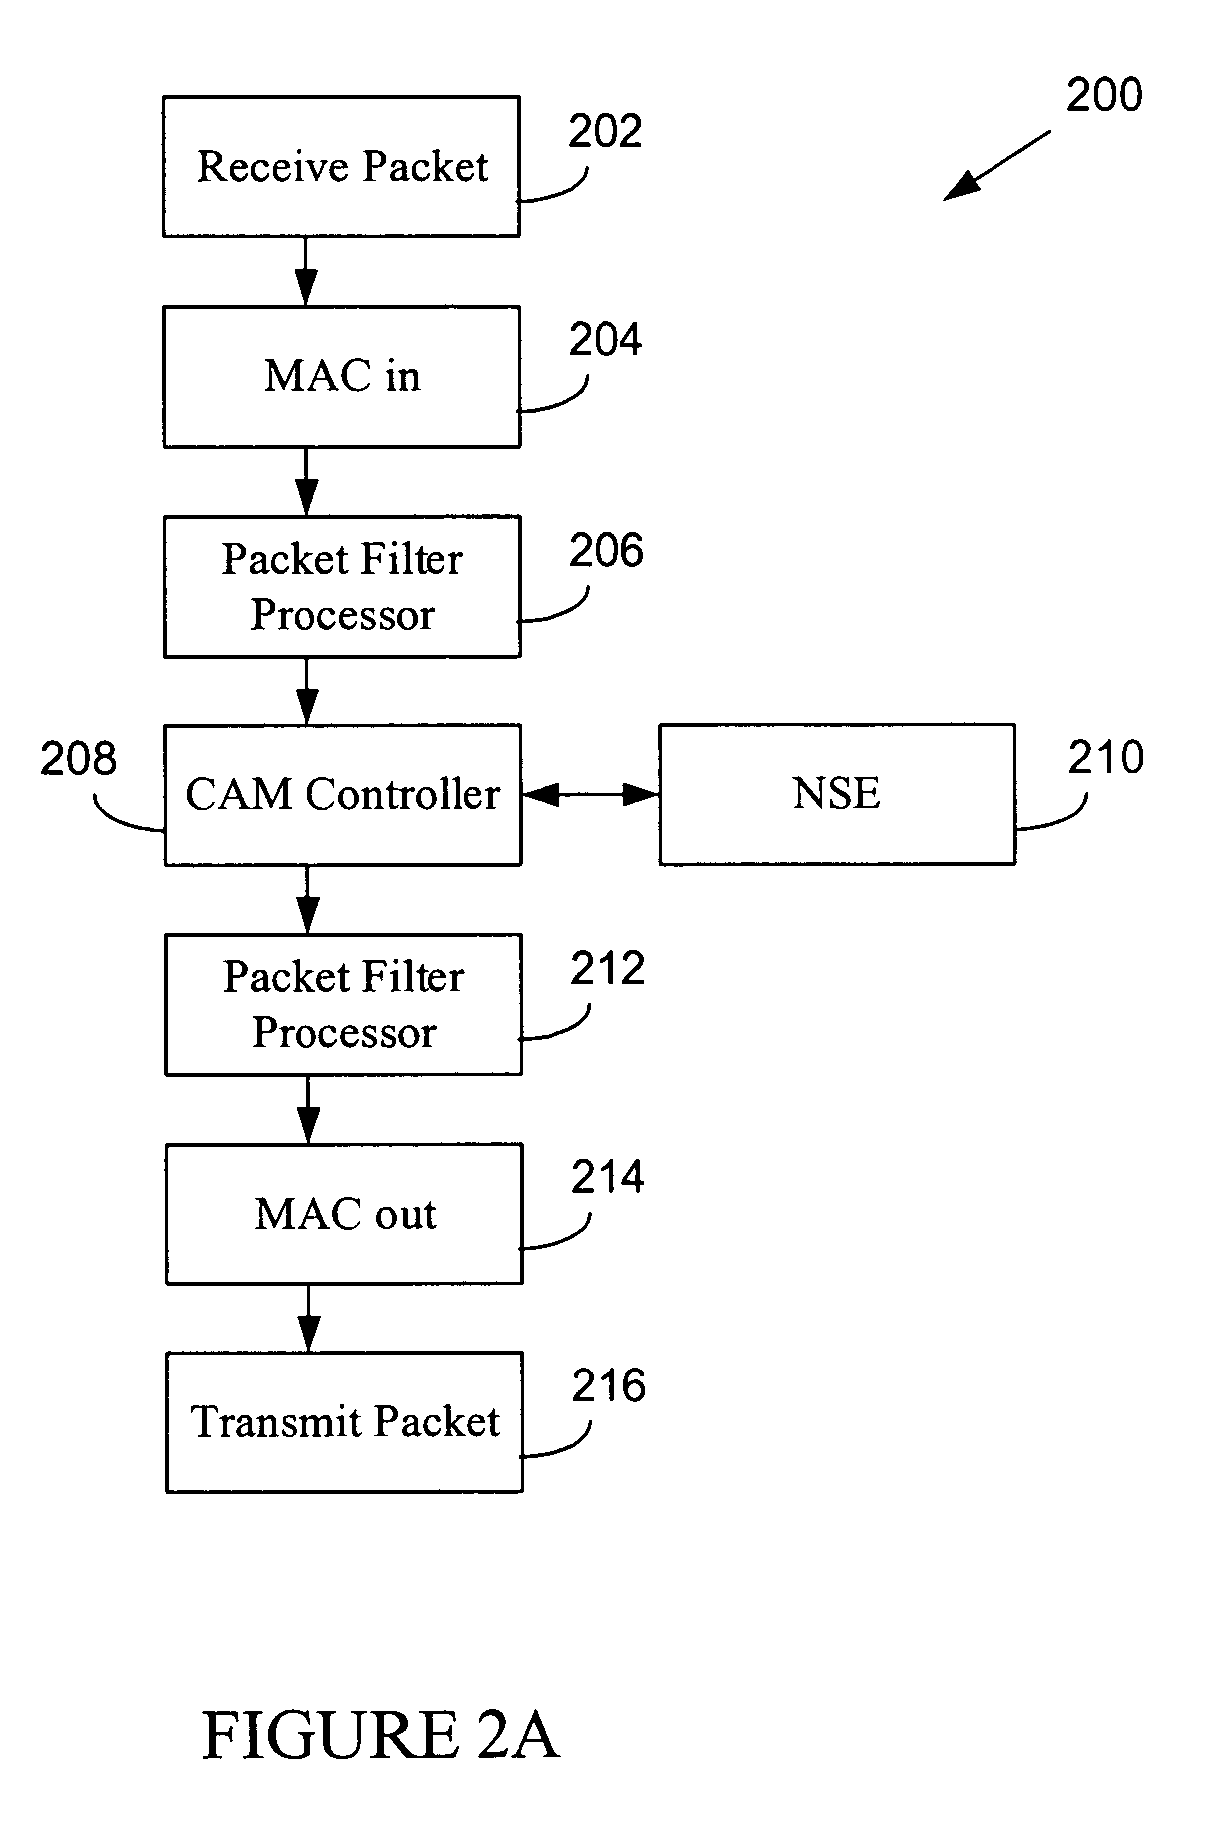 Active packet content analyzer for communications network